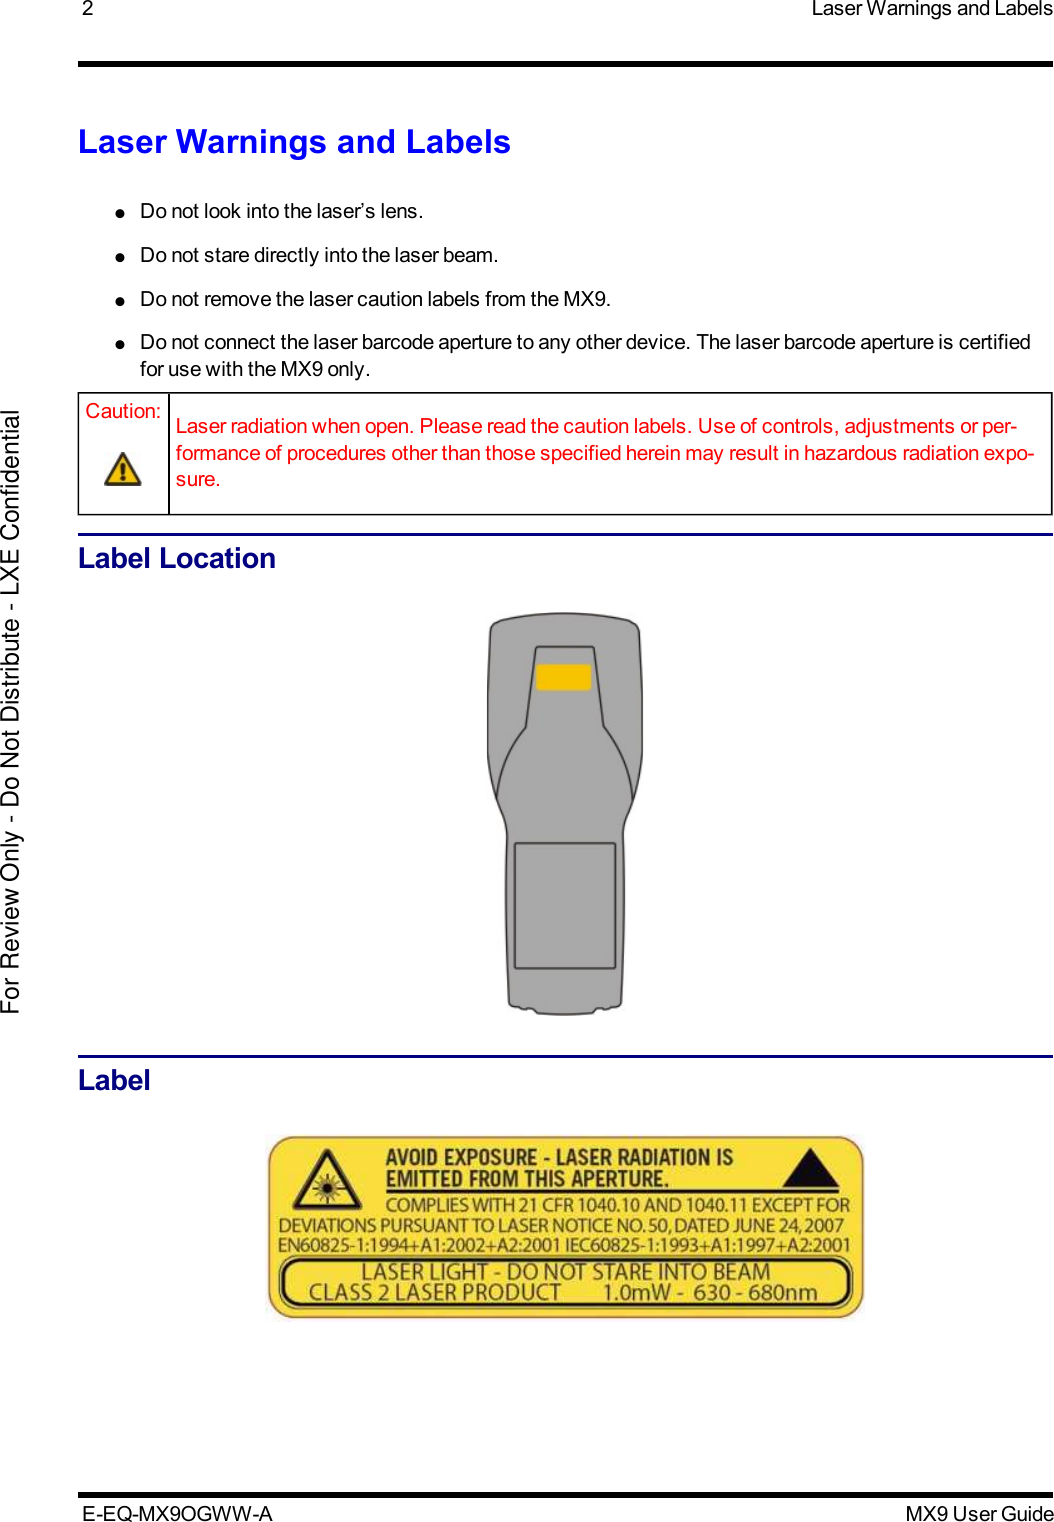 2 Laser Warnings and LabelsLaser Warnings and Labels●Do not look into the laser’s lens.●Do not stare directly into the laser beam.●Do not remove the laser caution labels from the MX9.●Do not connect the laser barcode aperture to any other device. The laser barcode aperture is certifiedfor use with the MX9 only.Caution: Laser radiation when open. Please read the caution labels. Use of controls, adjustments or per-formance of procedures other than those specified herein may result in hazardous radiation expo-sure.Label LocationLabelE-EQ-MX9OGWW-A MX9 User GuideFor Review Only - Do Not Distribute - LXE Confidential